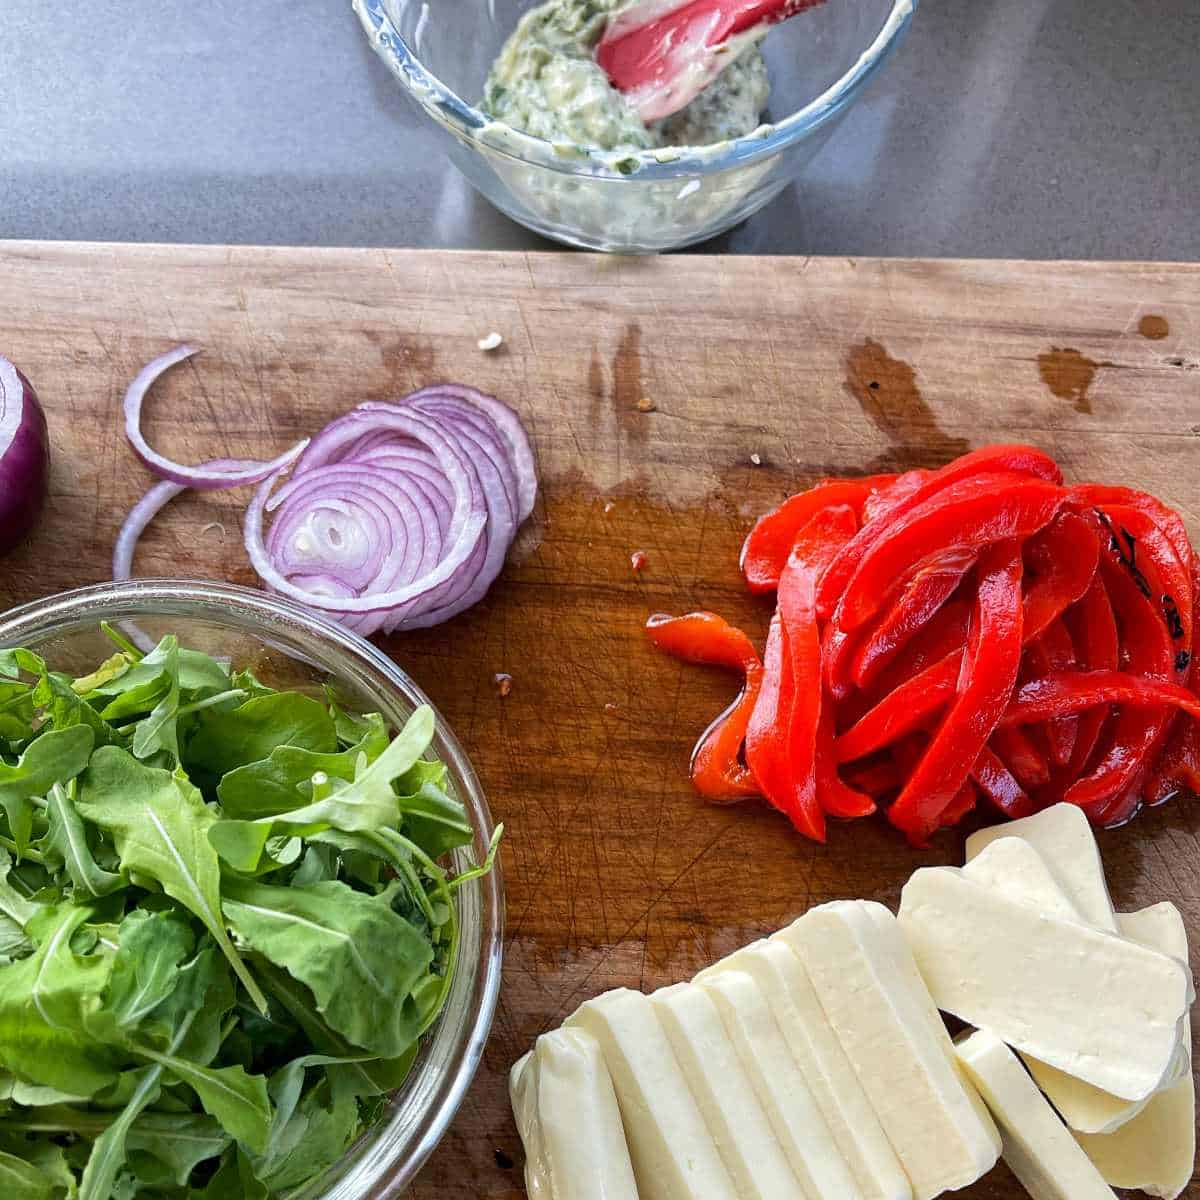 The sliced ingredients for a Halloumi Burger on a wooden chopping board.